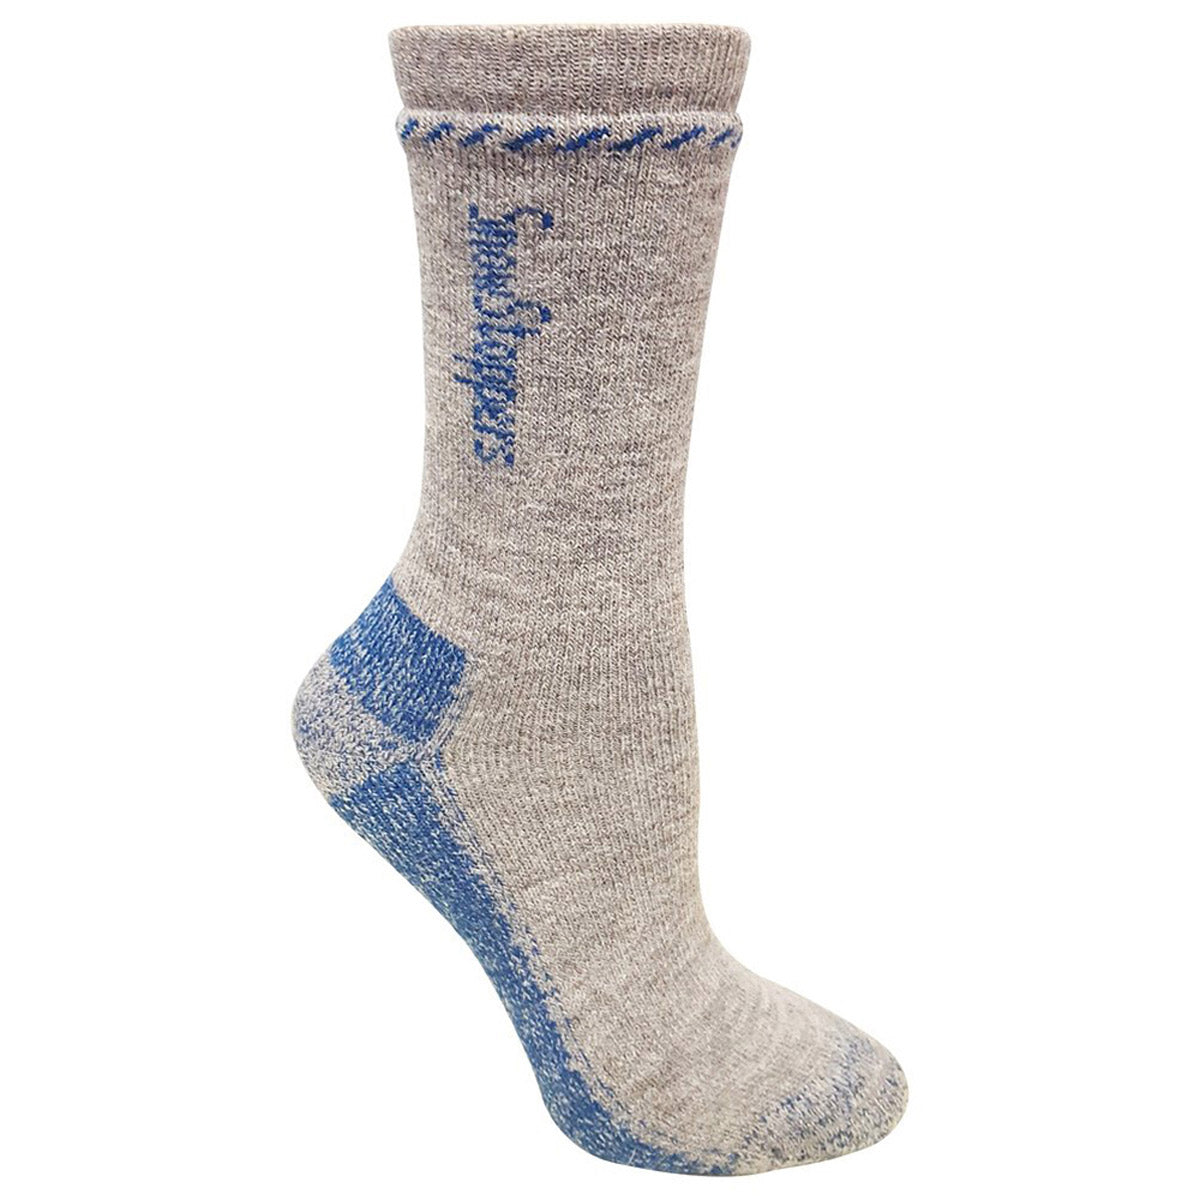 A single gray thermal SNOWSTOPPERS KIDS ALPACA SOCK with blue accents and water-resistant properties, featuring Canadiansox branding on the side.